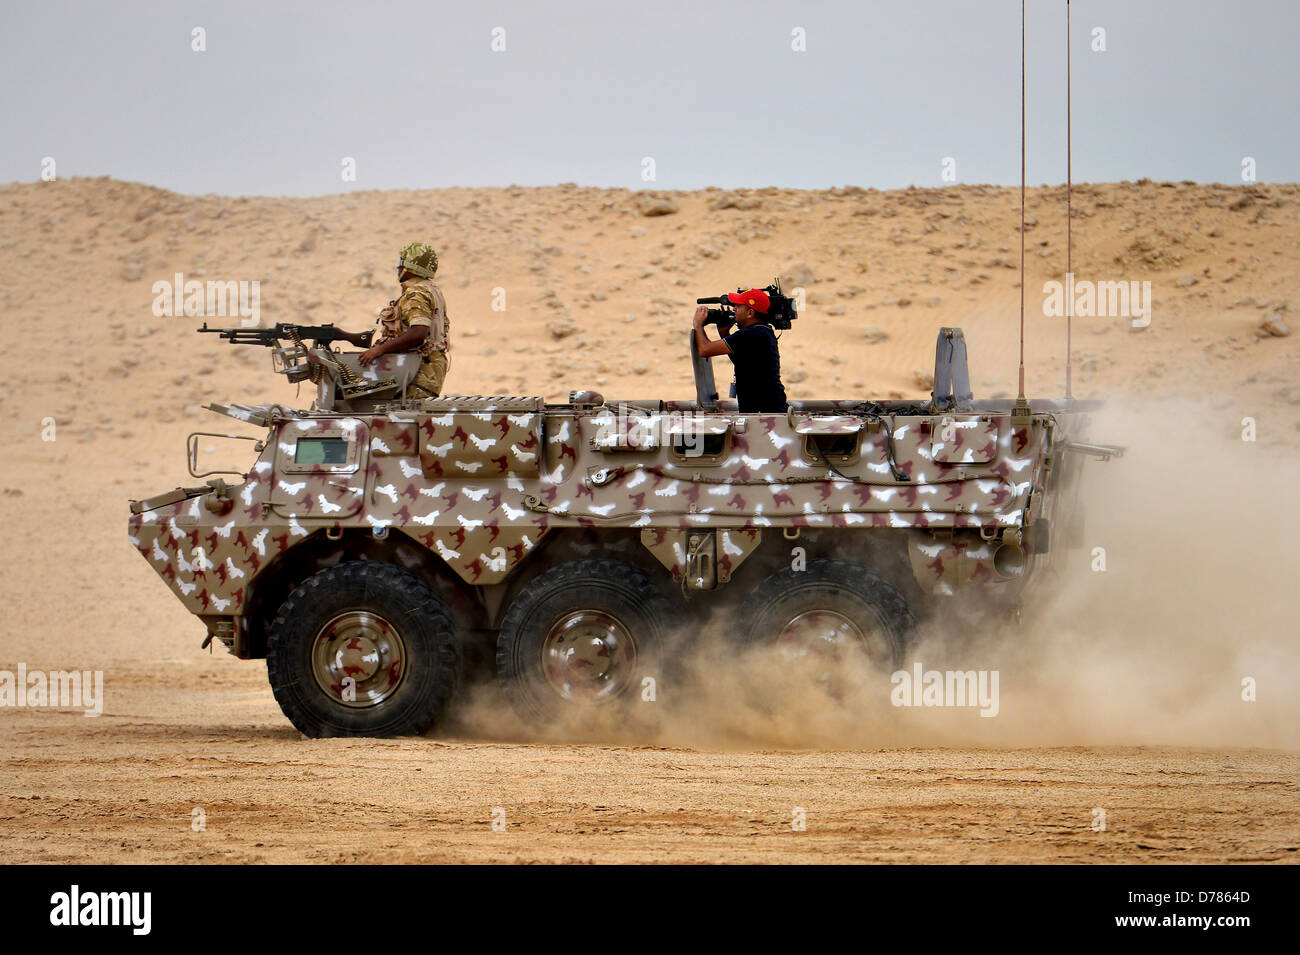 Qatar Armed Forces soldiers patrol in an armored vehicle during a joint counter-terrorism exercise with US Forces April 28, 2013 in Zikrit, Qatar. Stock Photo